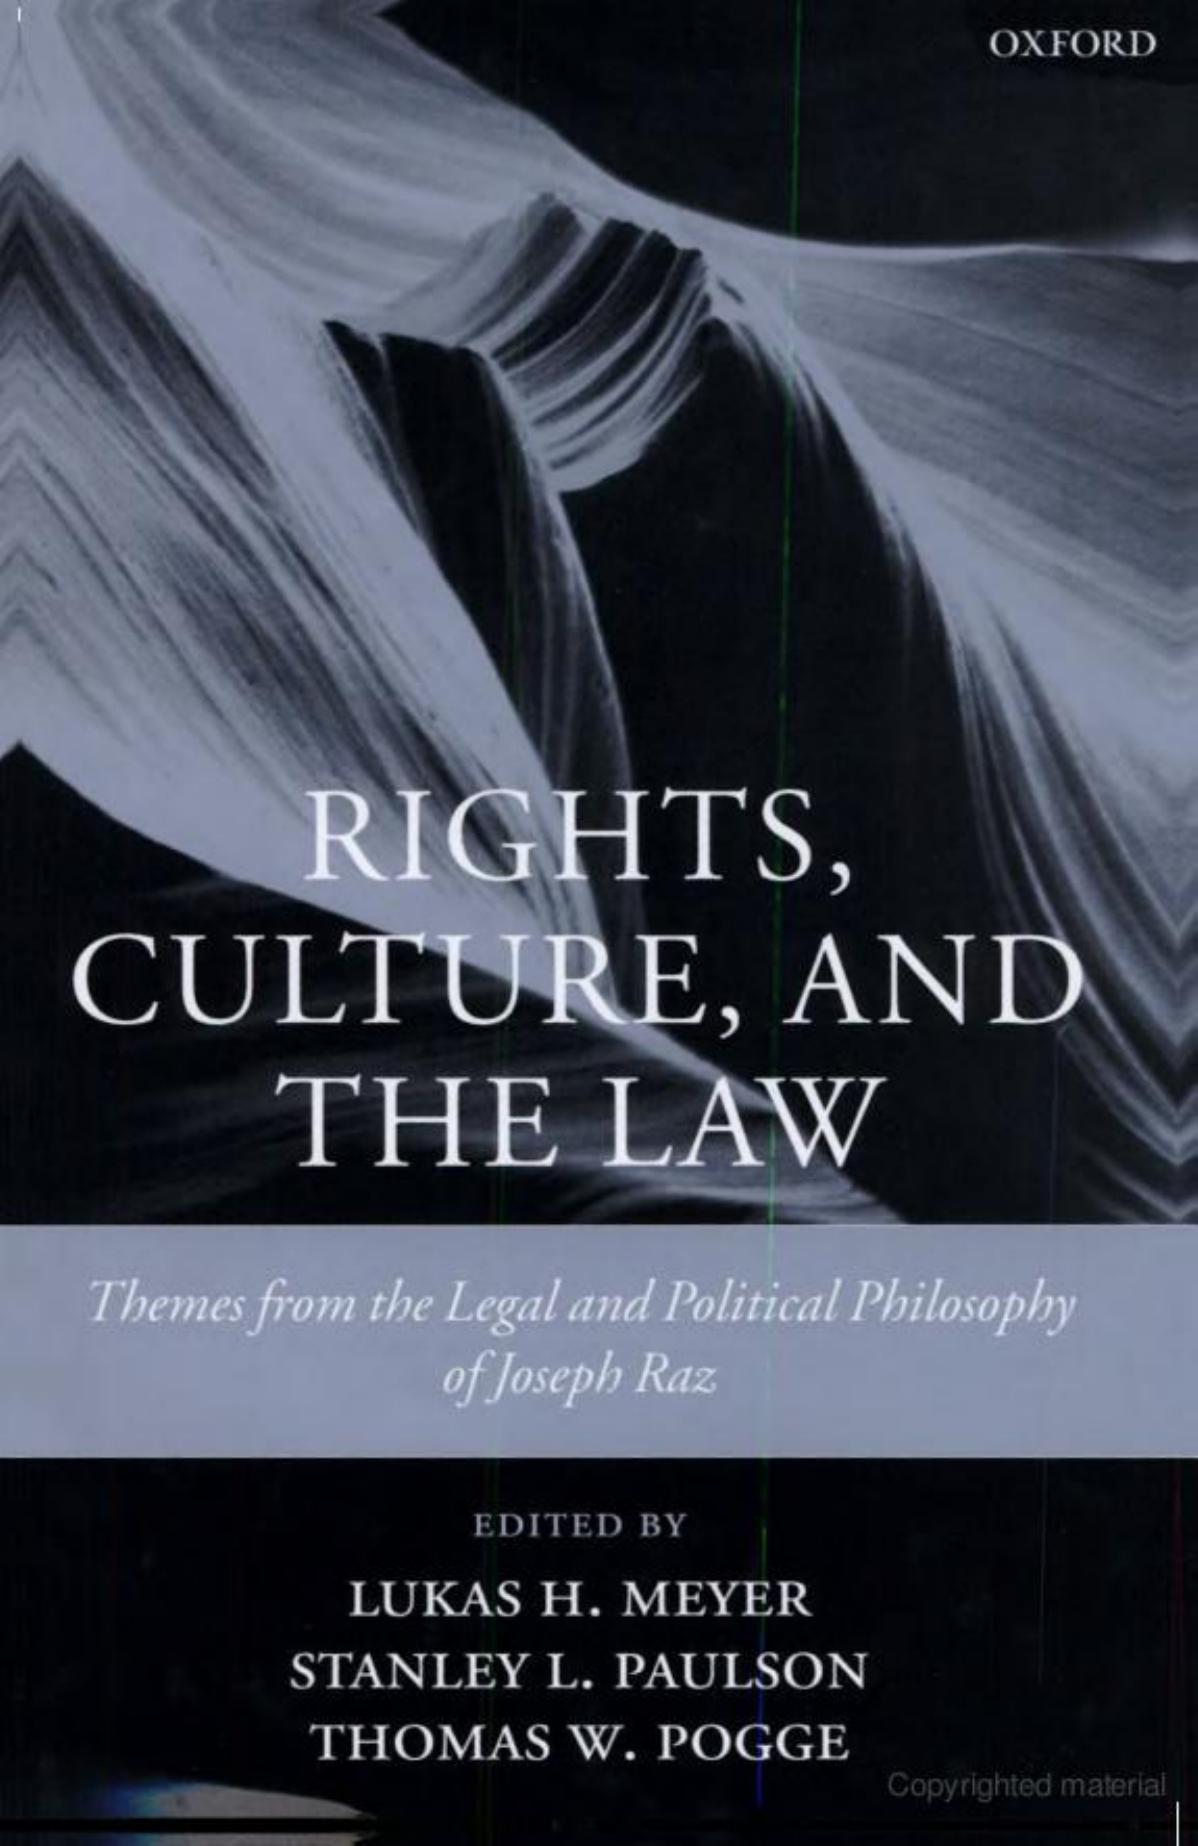 Rights, culture, and the law